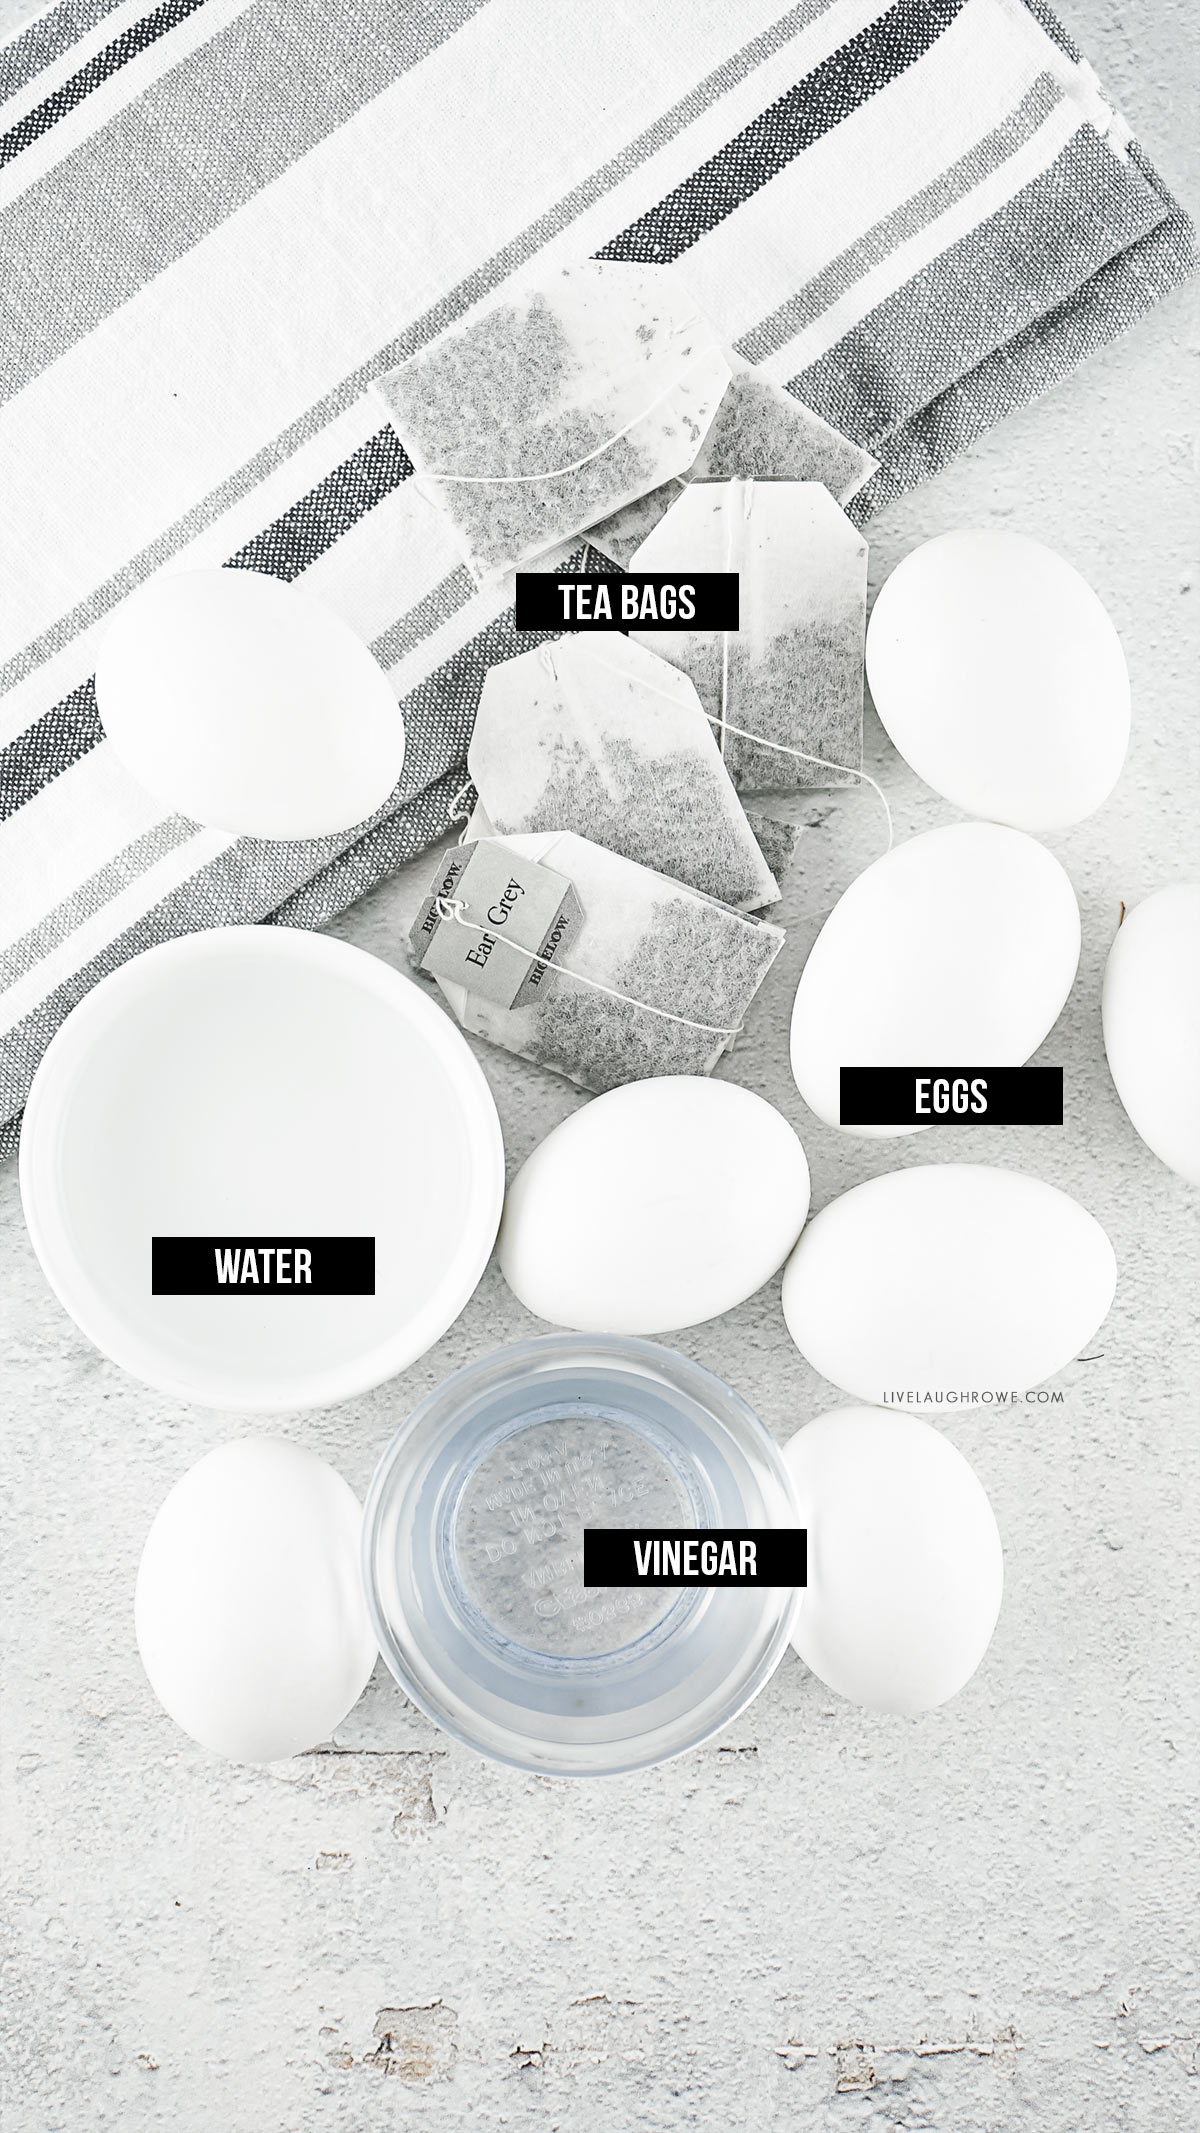 Ingredients for Tea Dyed Eggs